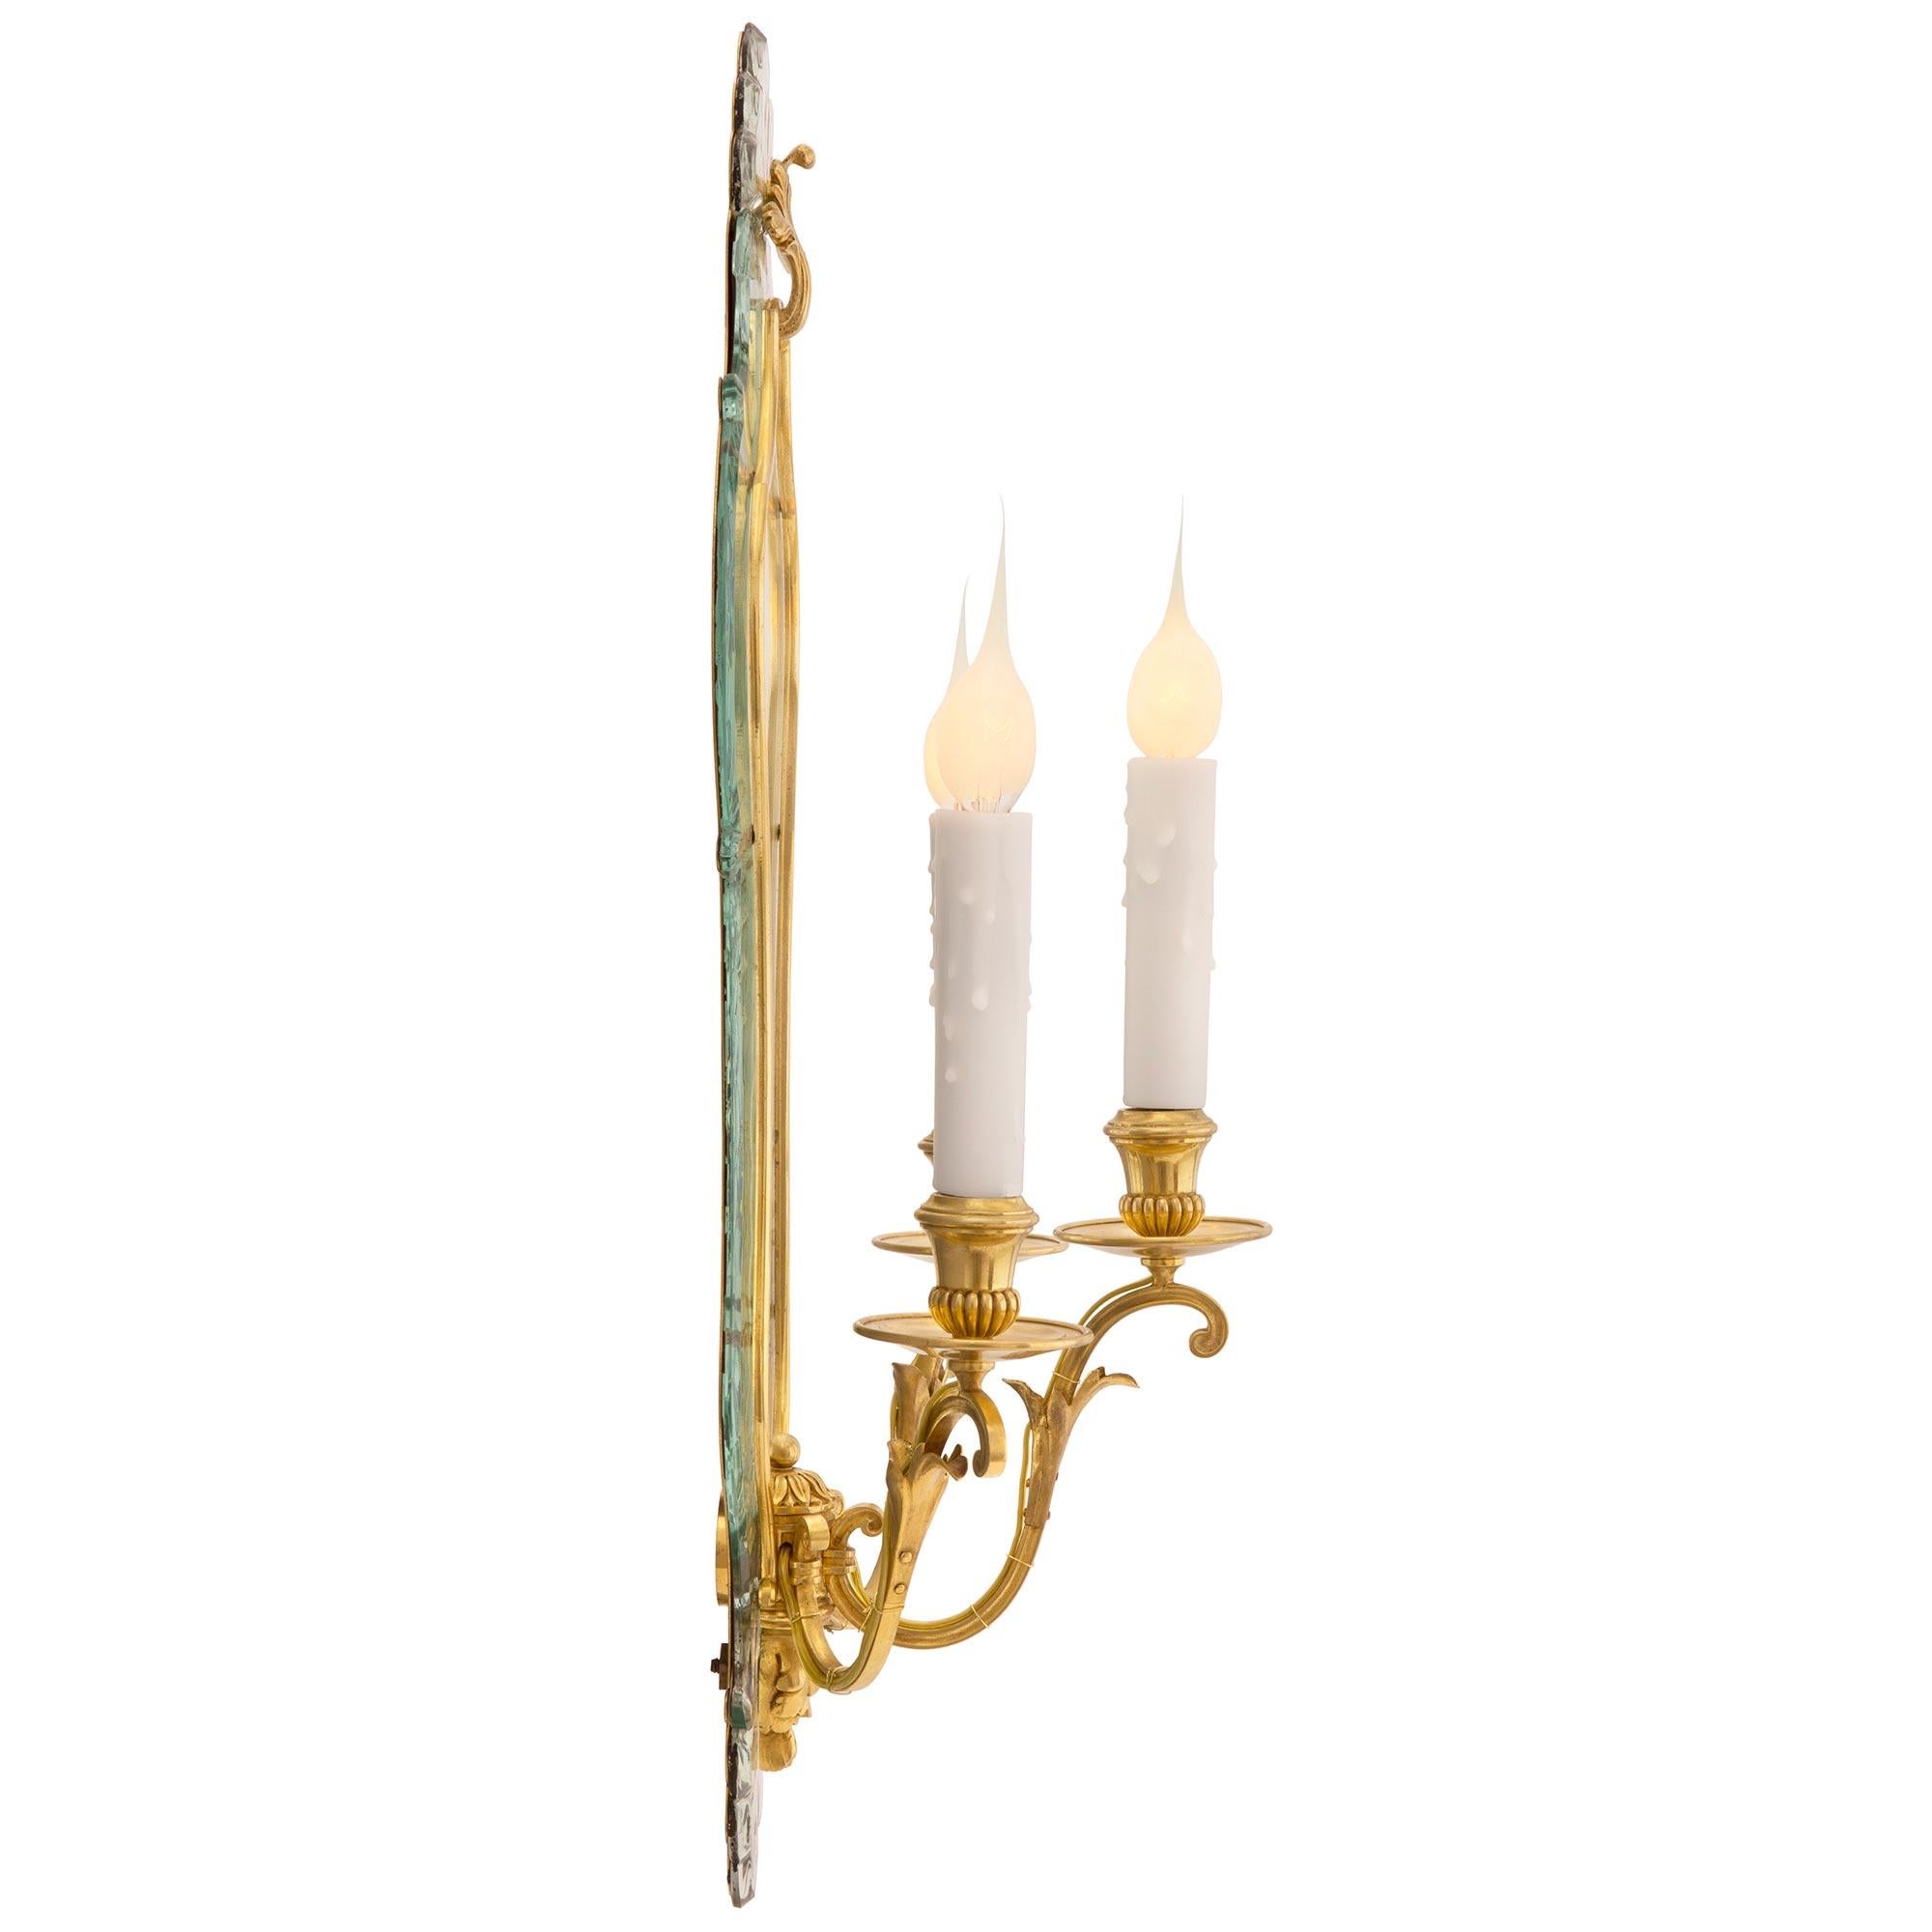 Pair of French Turn-of-the-Century Venetian Style Ormolu and Mirrored Sconces In Good Condition For Sale In West Palm Beach, FL